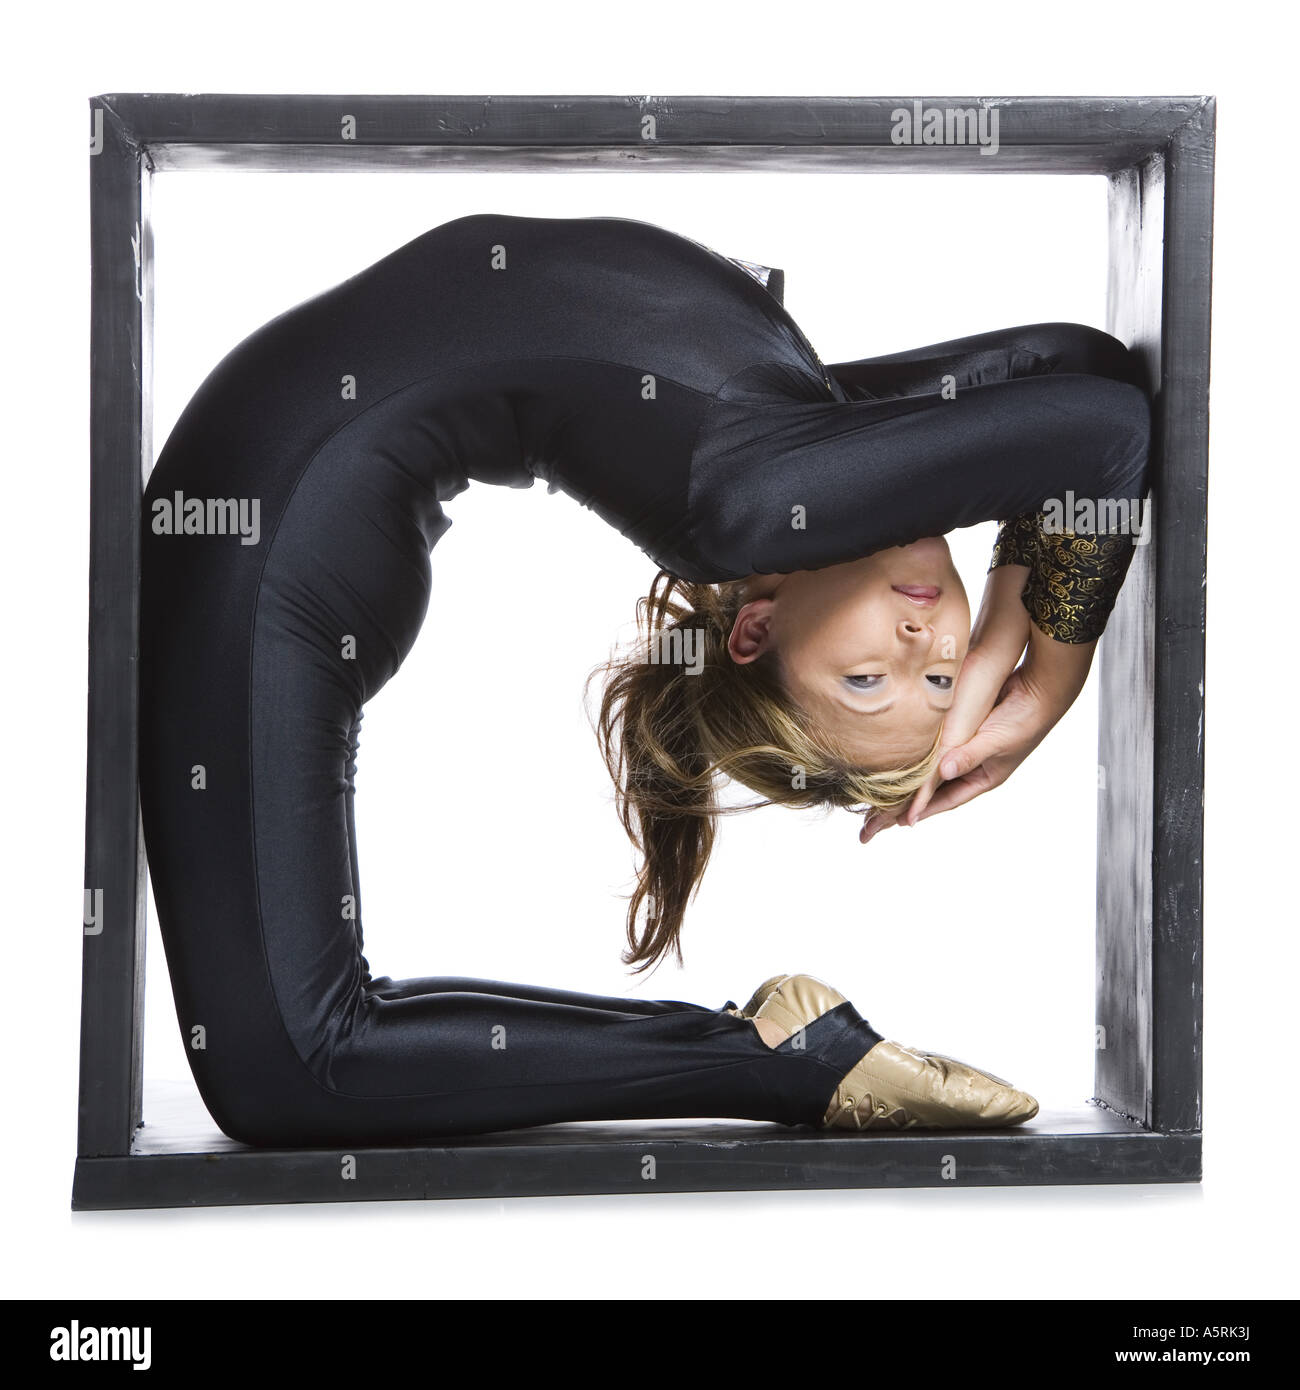 Female contortionist inside the box Stock Photo